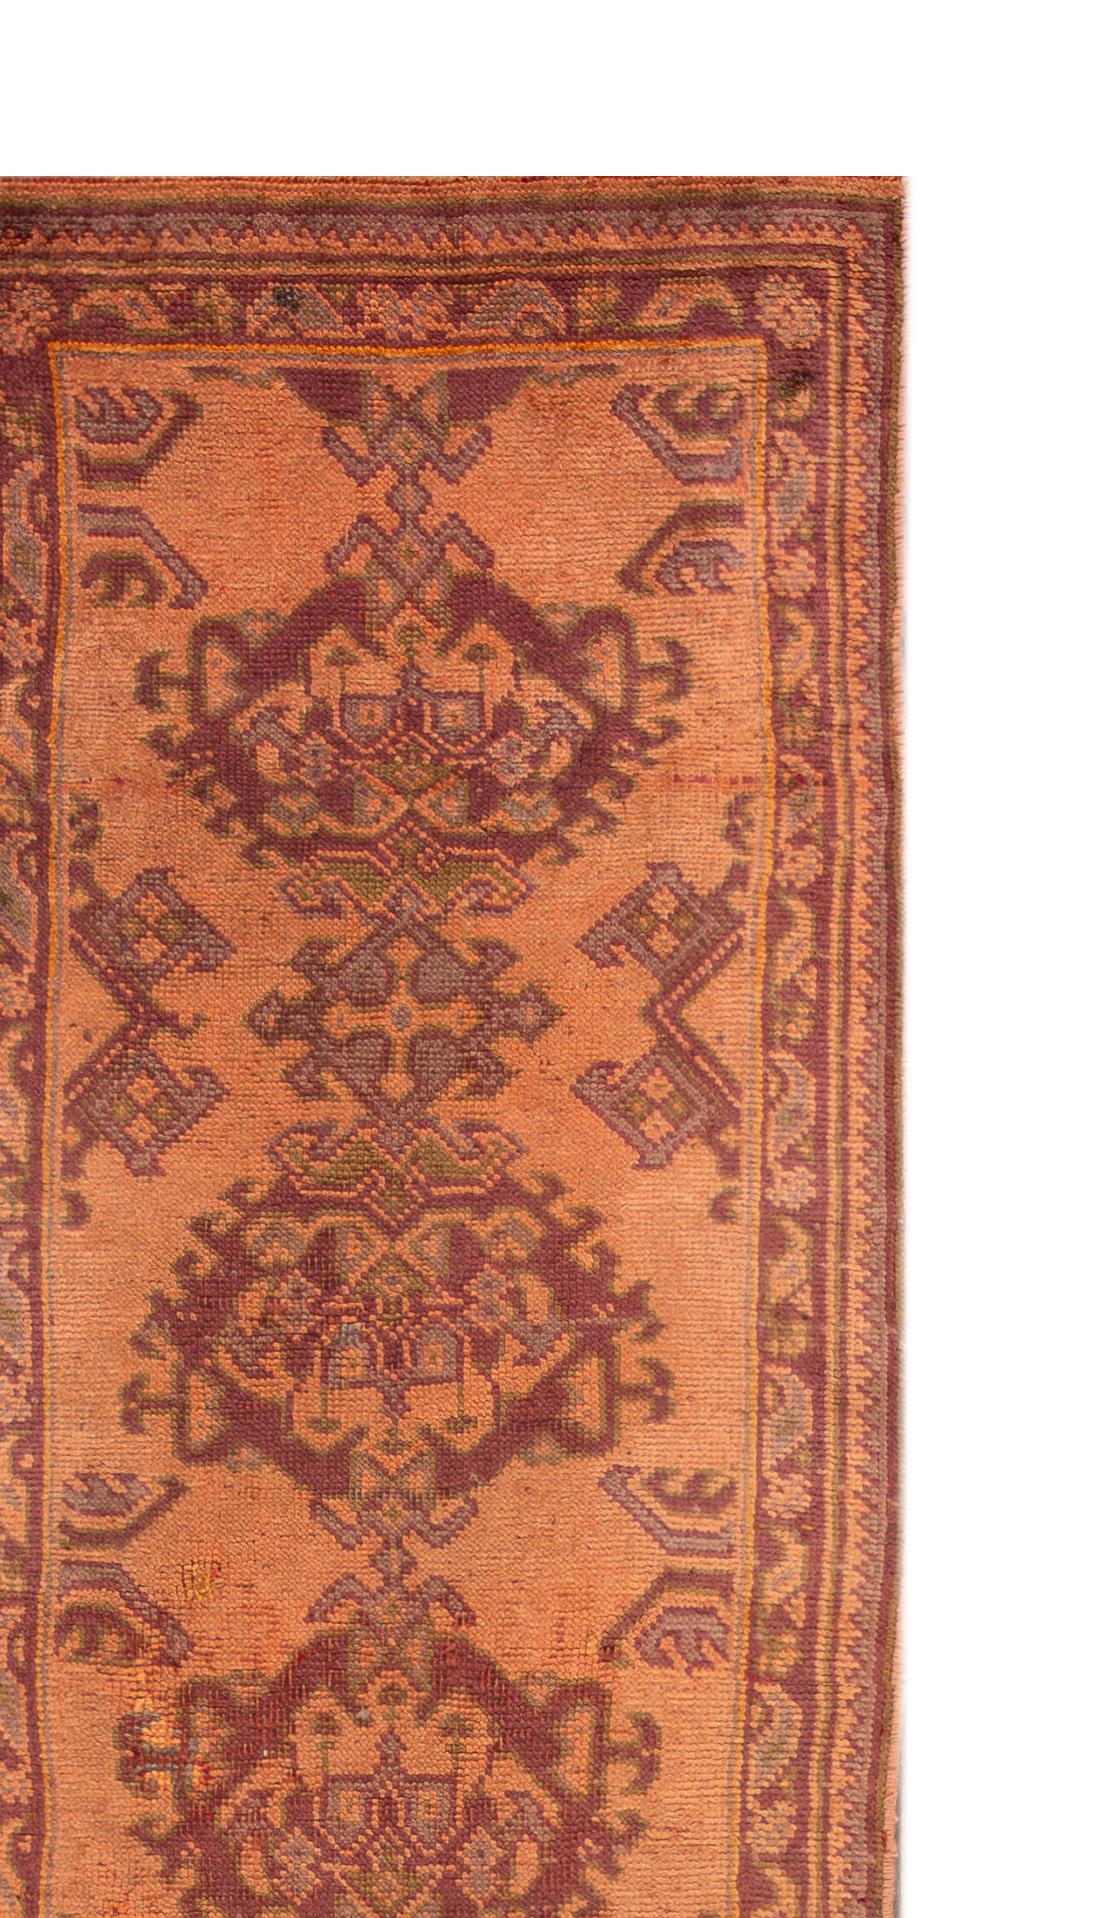 Beautiful hand-knotted Oushak style wool rug with an orange field with brown mandala accents. 

This rug measures 3' x 11' 8